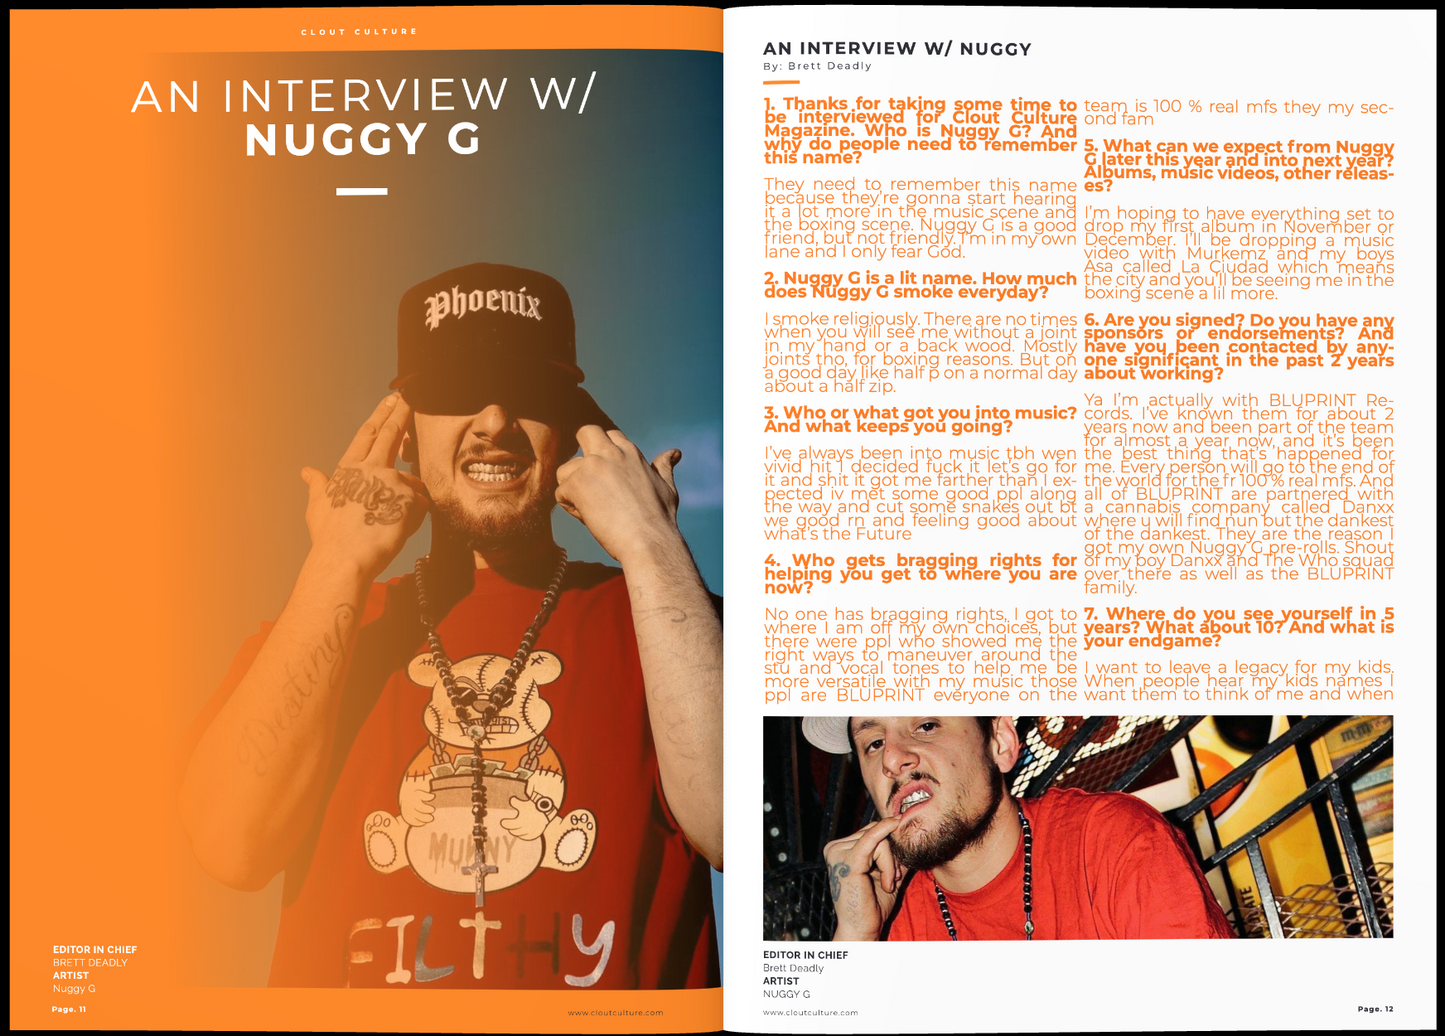 Clout Culture Magazine Issue #4 The 411 Show